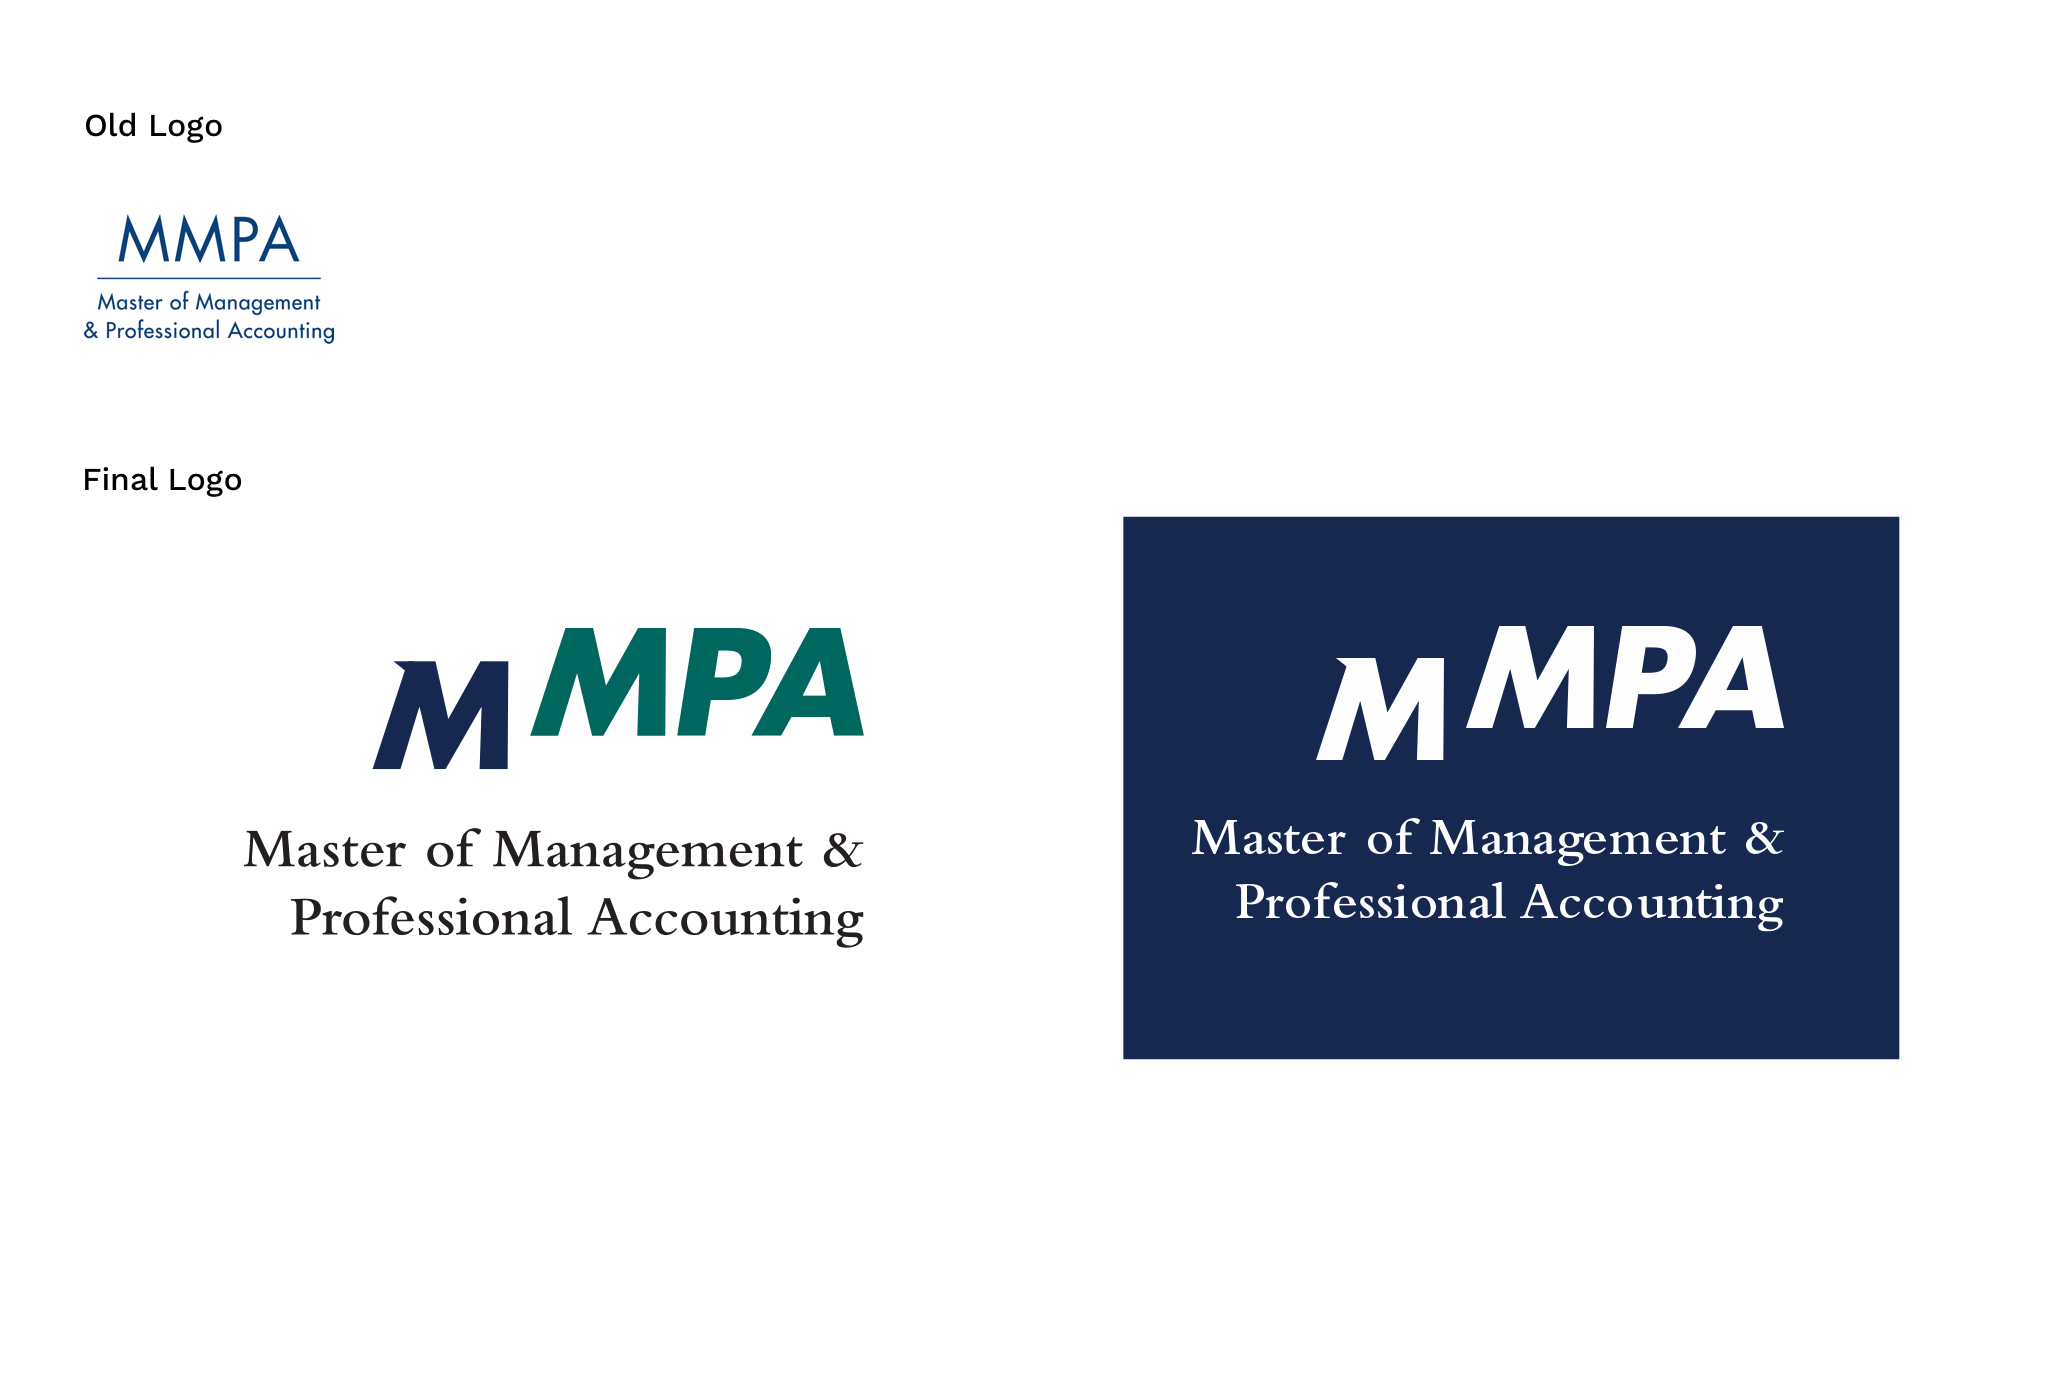 Photo of MMPA previous and final logo